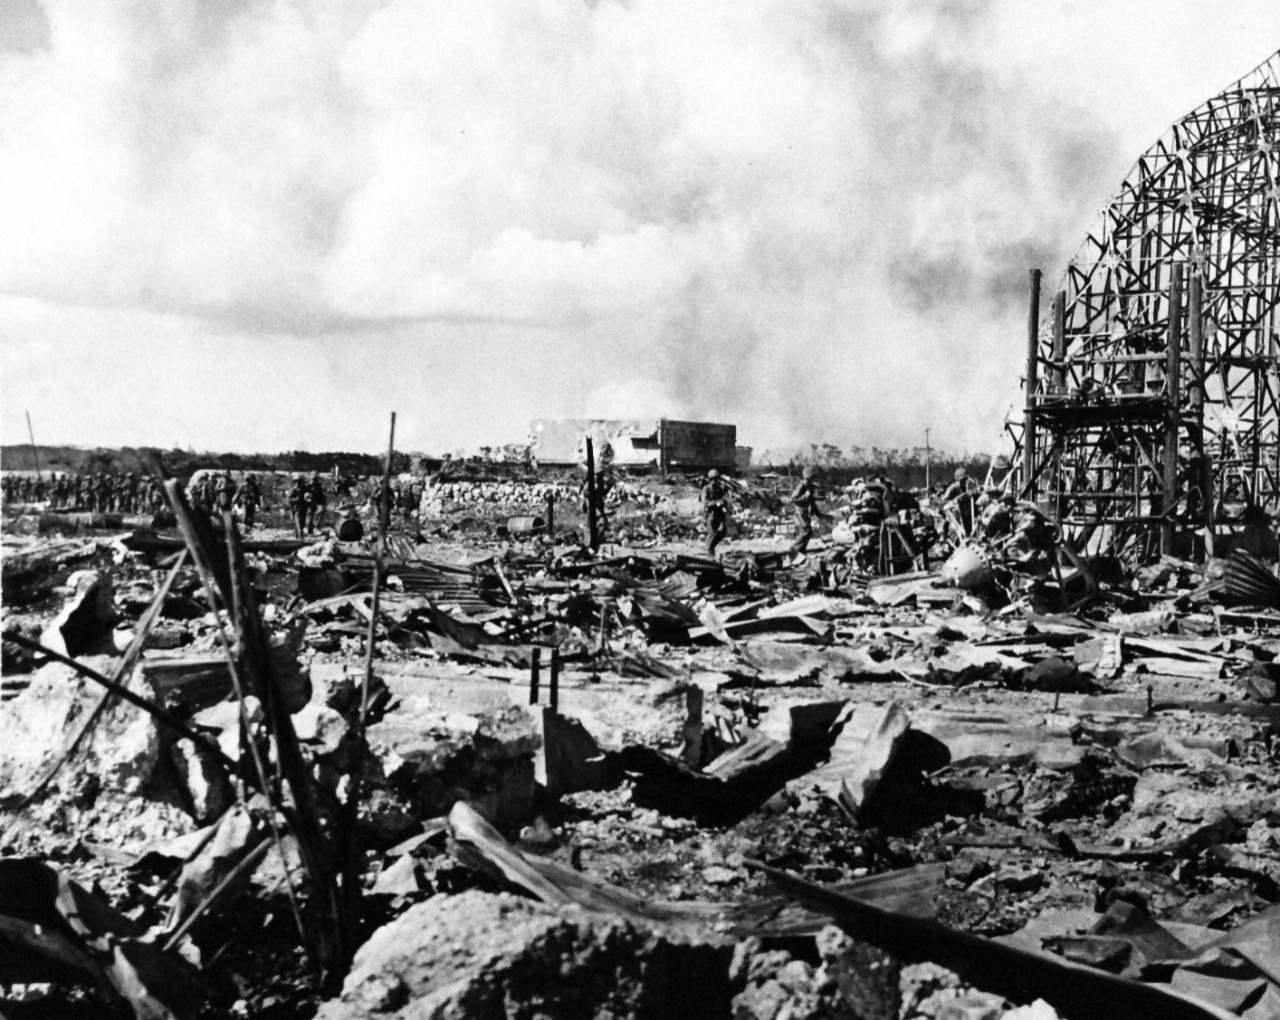 80-G-239297:  Invasion of Tinian, July-August 1944.   U.S. Marines move across the wreckage of a Japanese airfield on the northern end of Tinian Island in the Mariana Islands as they continue their mopping up operations, released  August 4, 1944.    Official U.S. Navy photograph, now in the collections of the National Archives.  (2017/03/07).